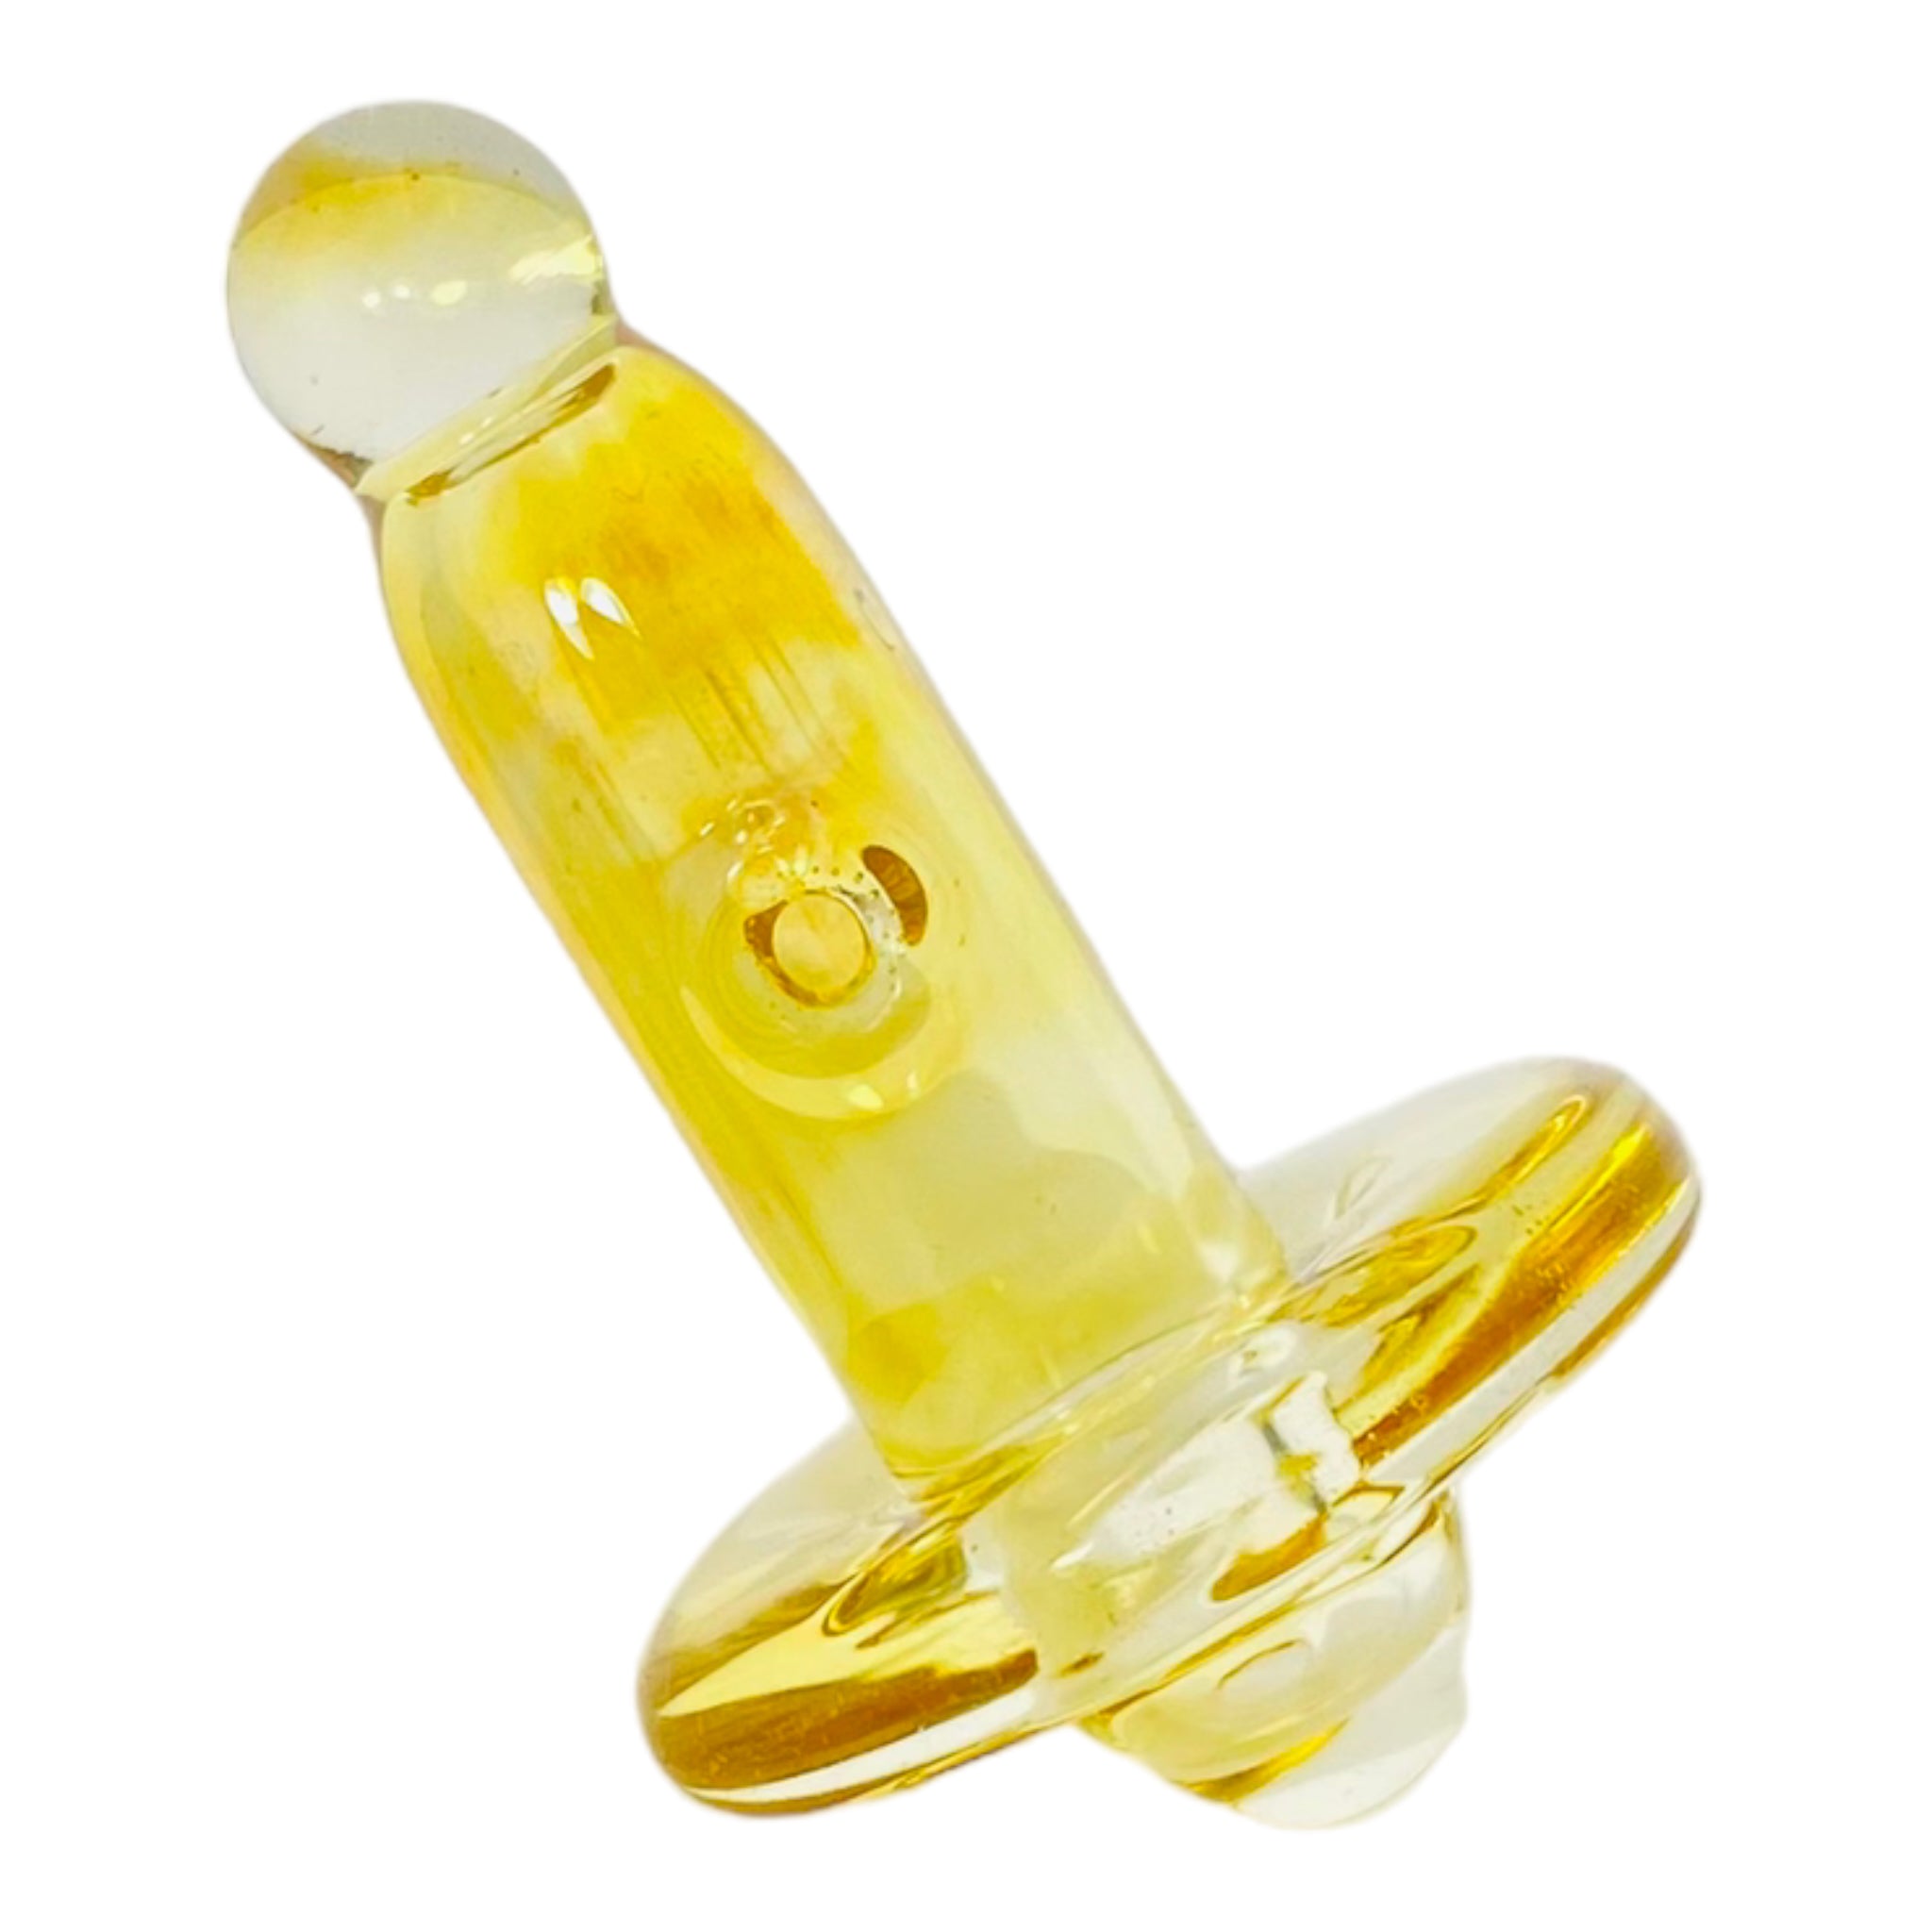 Directional Airflow Glass Carb Cab With Yellow Silver Fuming